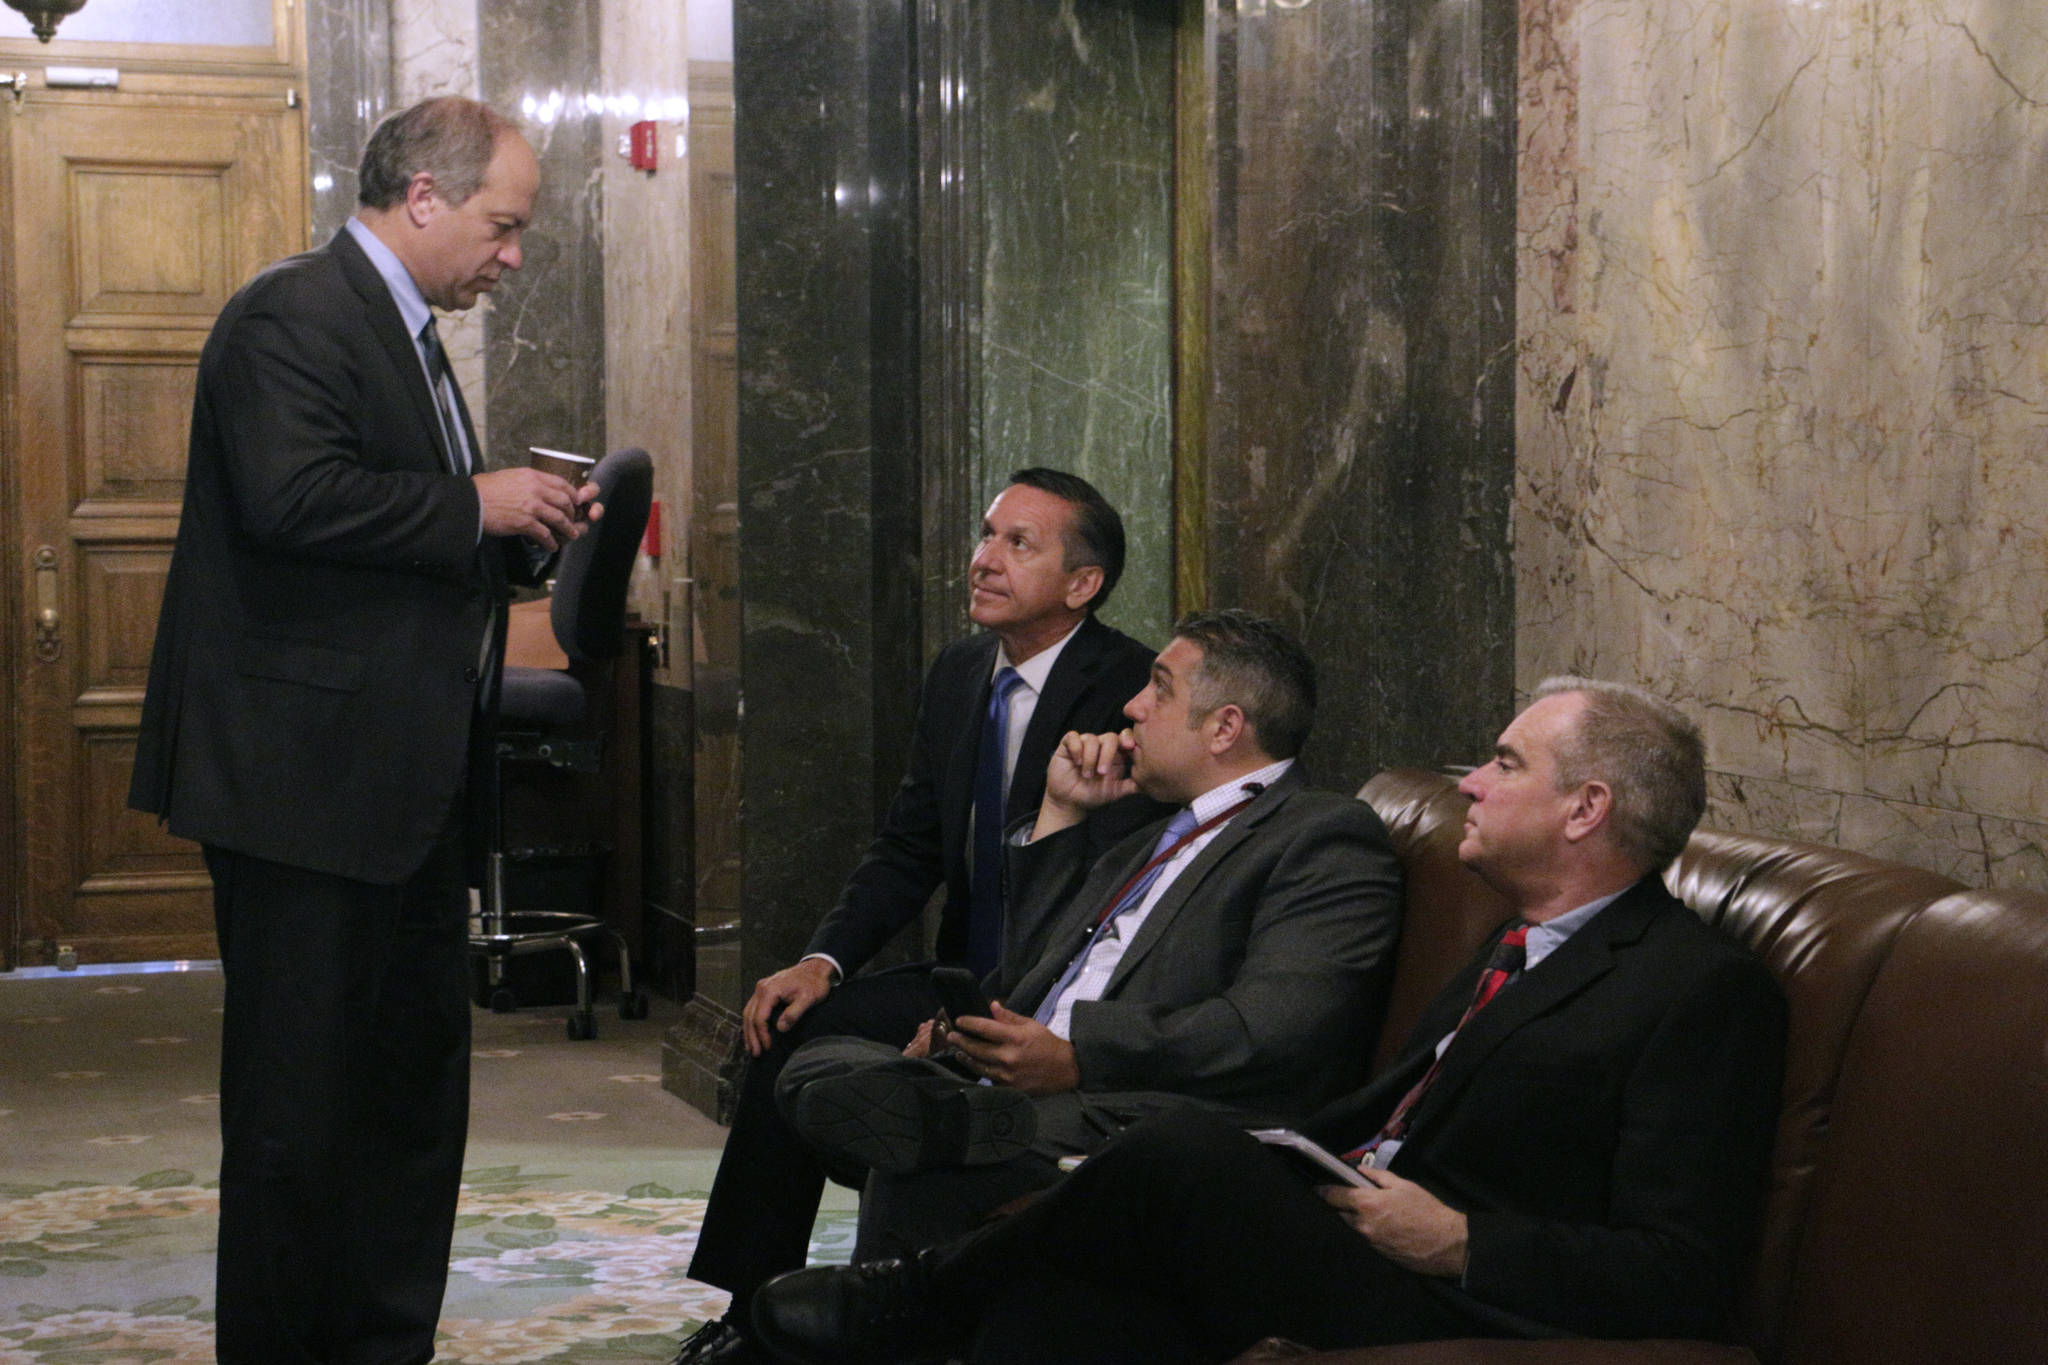 Republican state Sen. Steve O’Ban, standing, talks with fellow Republican Sen. Dino Rossi, seated far left, and caucus staffers in the Senate wings before heading into a meeting to hear details on a state budget deal on Thursday in Olympia. A new two-year budget must be signed into law by midnight Friday in order to avoid a partial state government shutdown. (Rachel La Corte/The Associated Press)